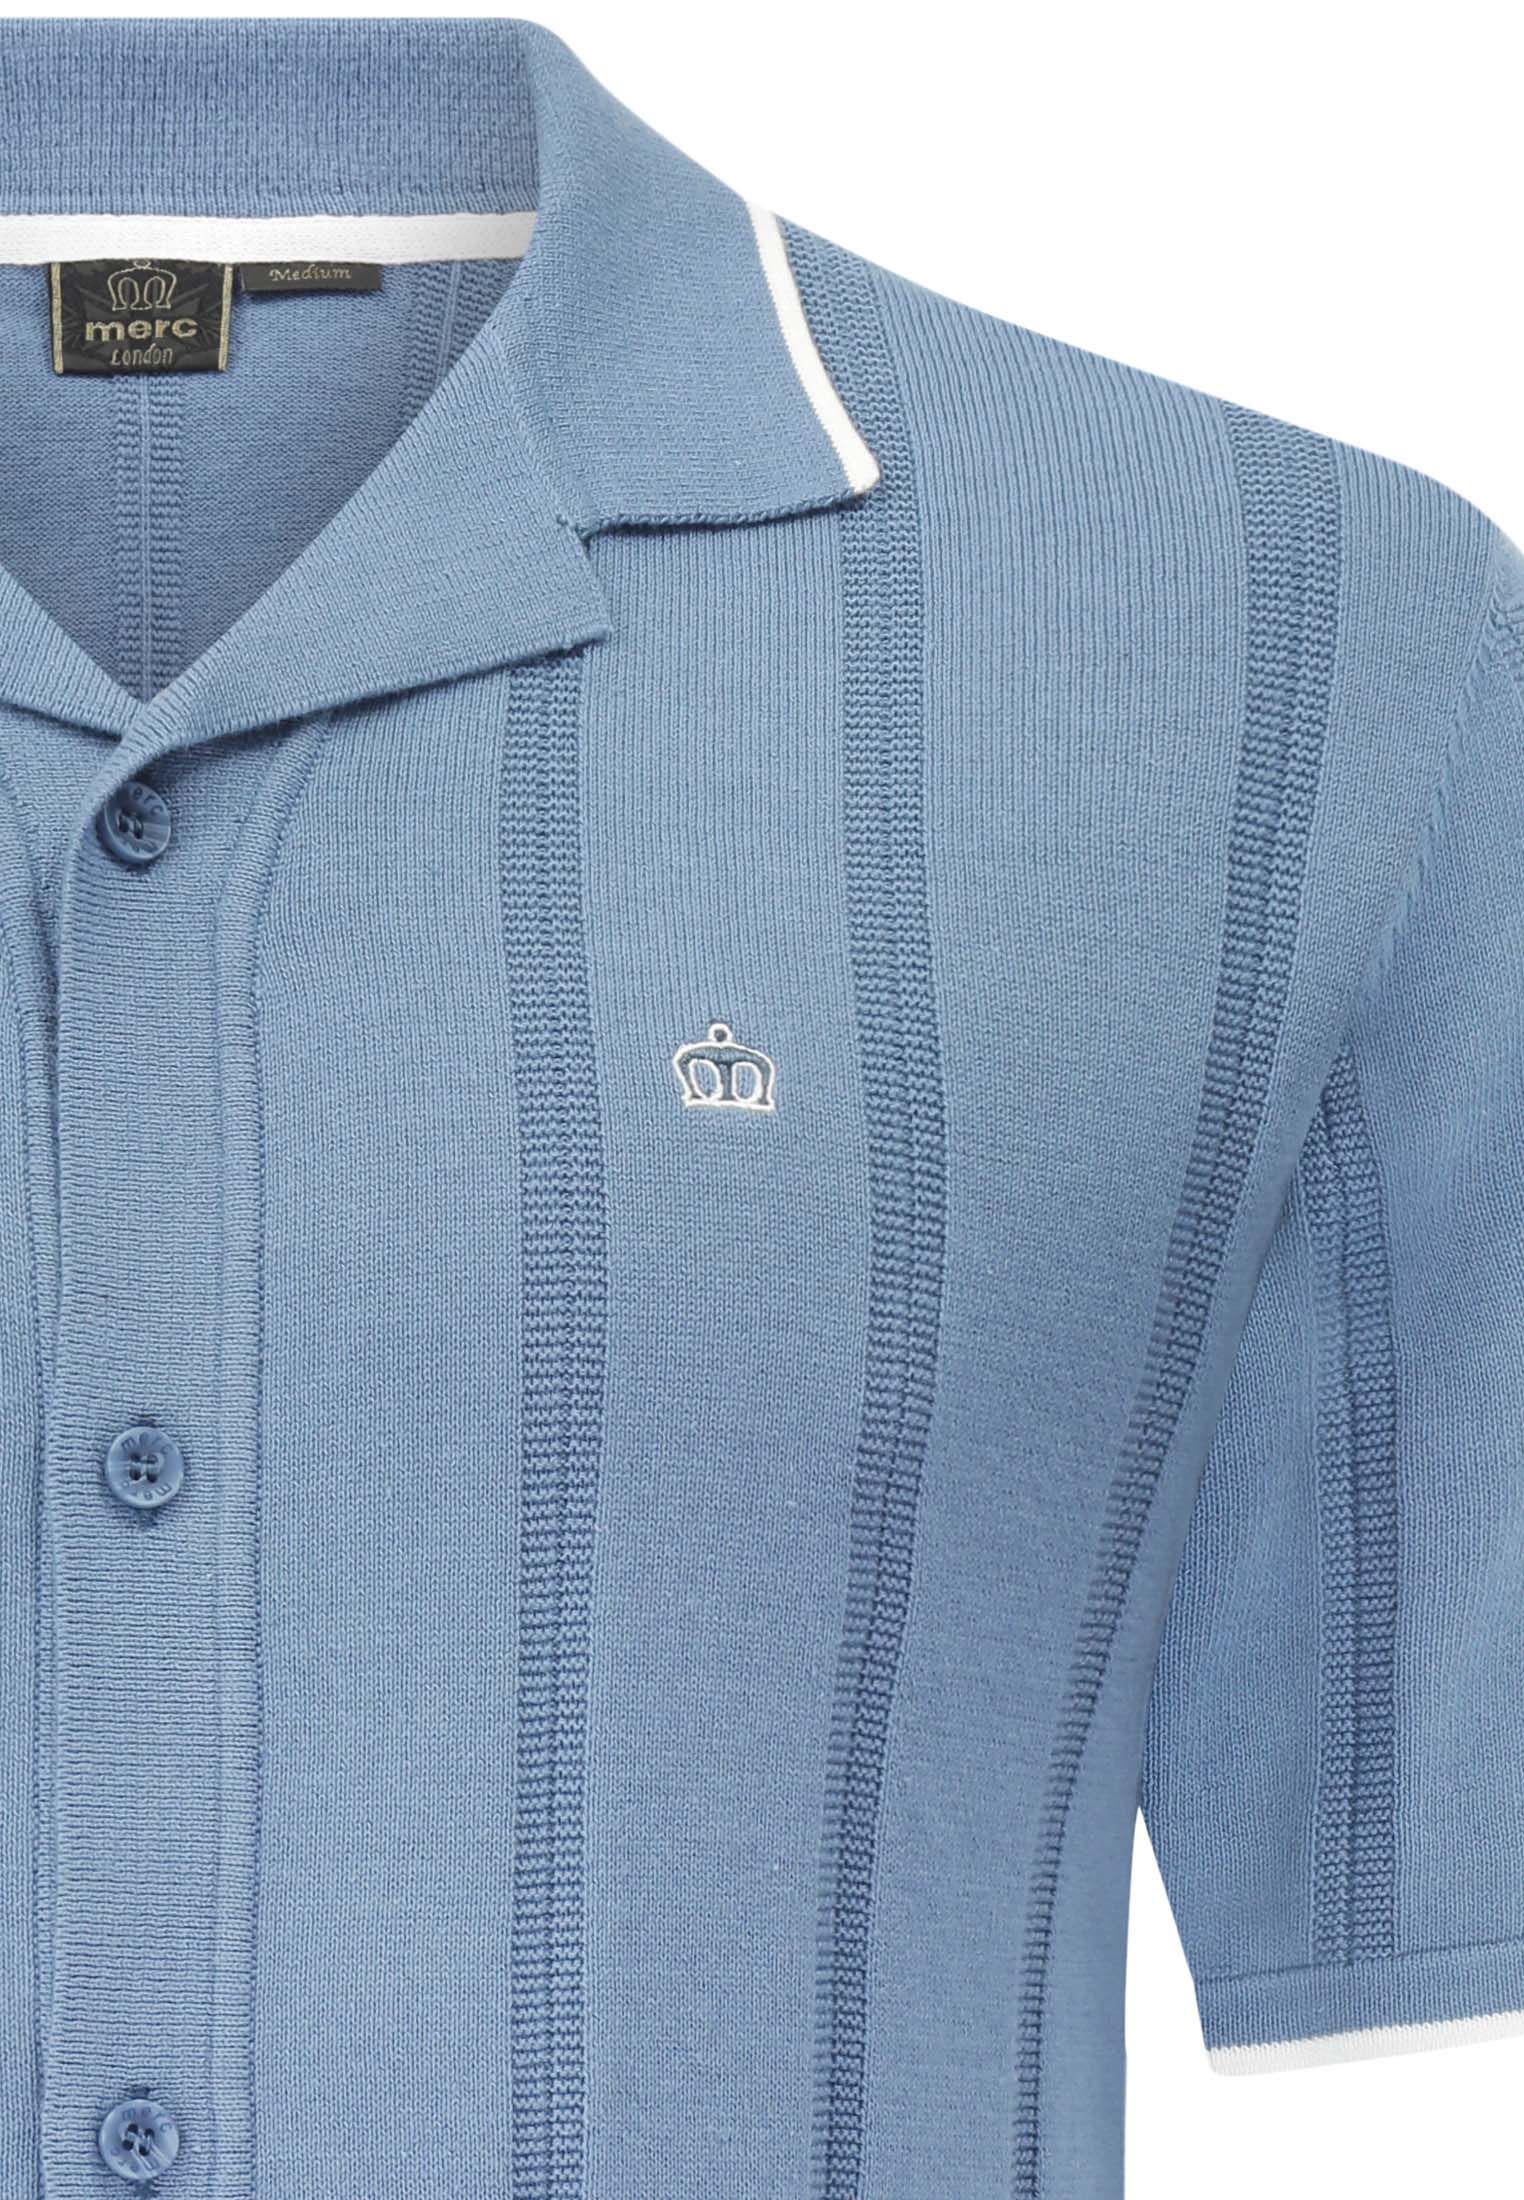 Camp Collar Knitted Polo Shirt in Blue by Merc